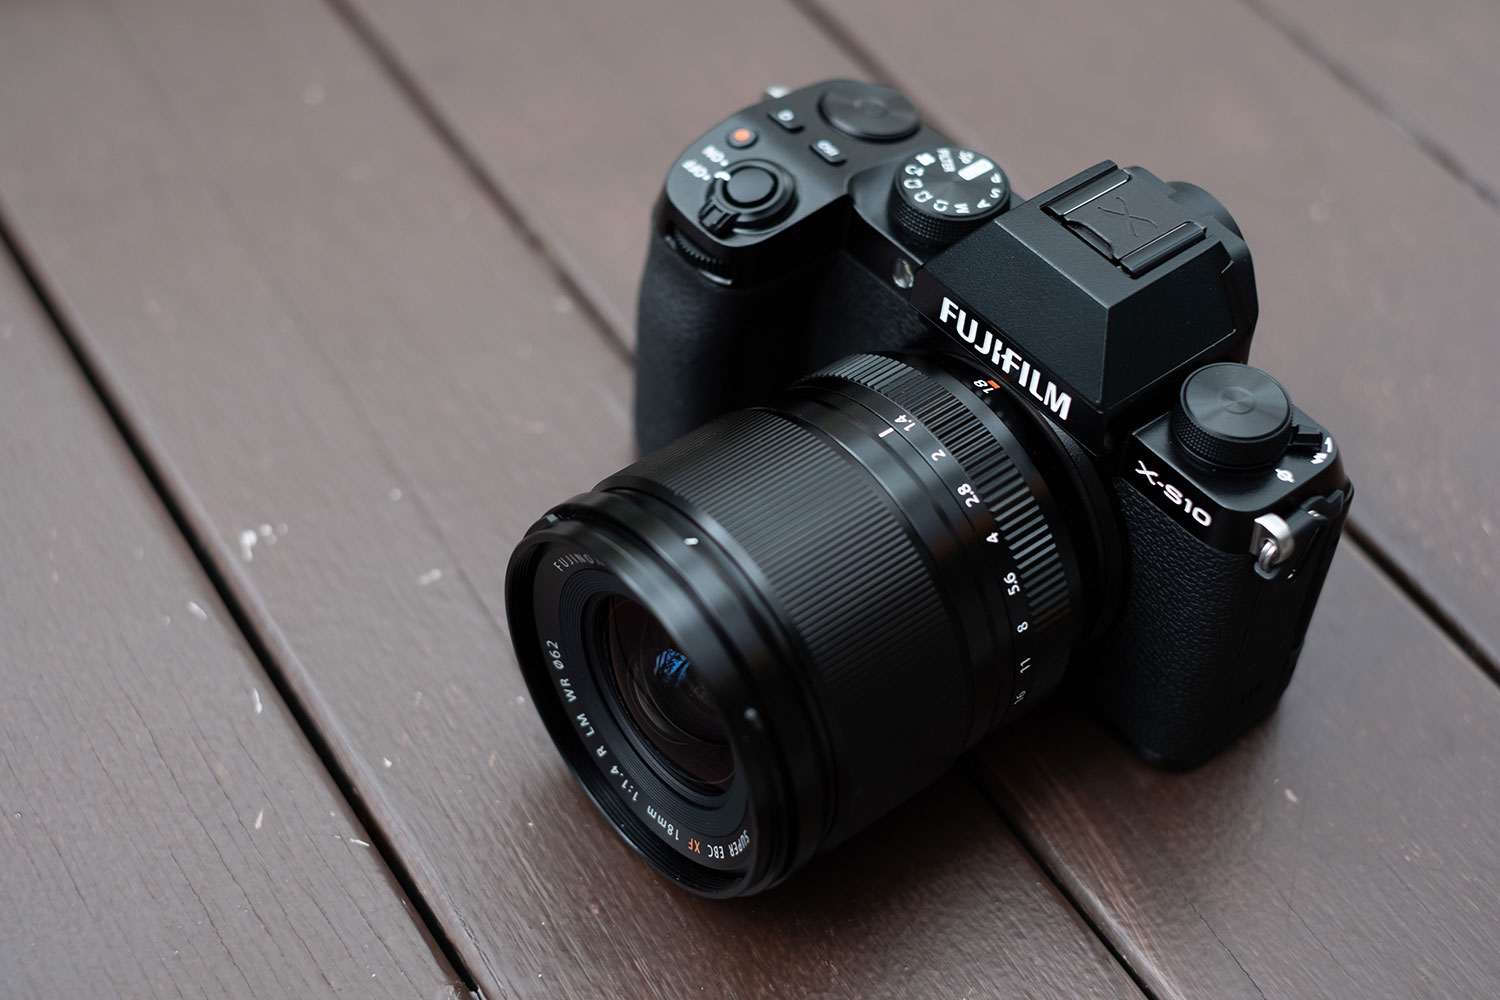 XF18mm F1.4 - Welcome to the F1.4 family - Fuji X Passion